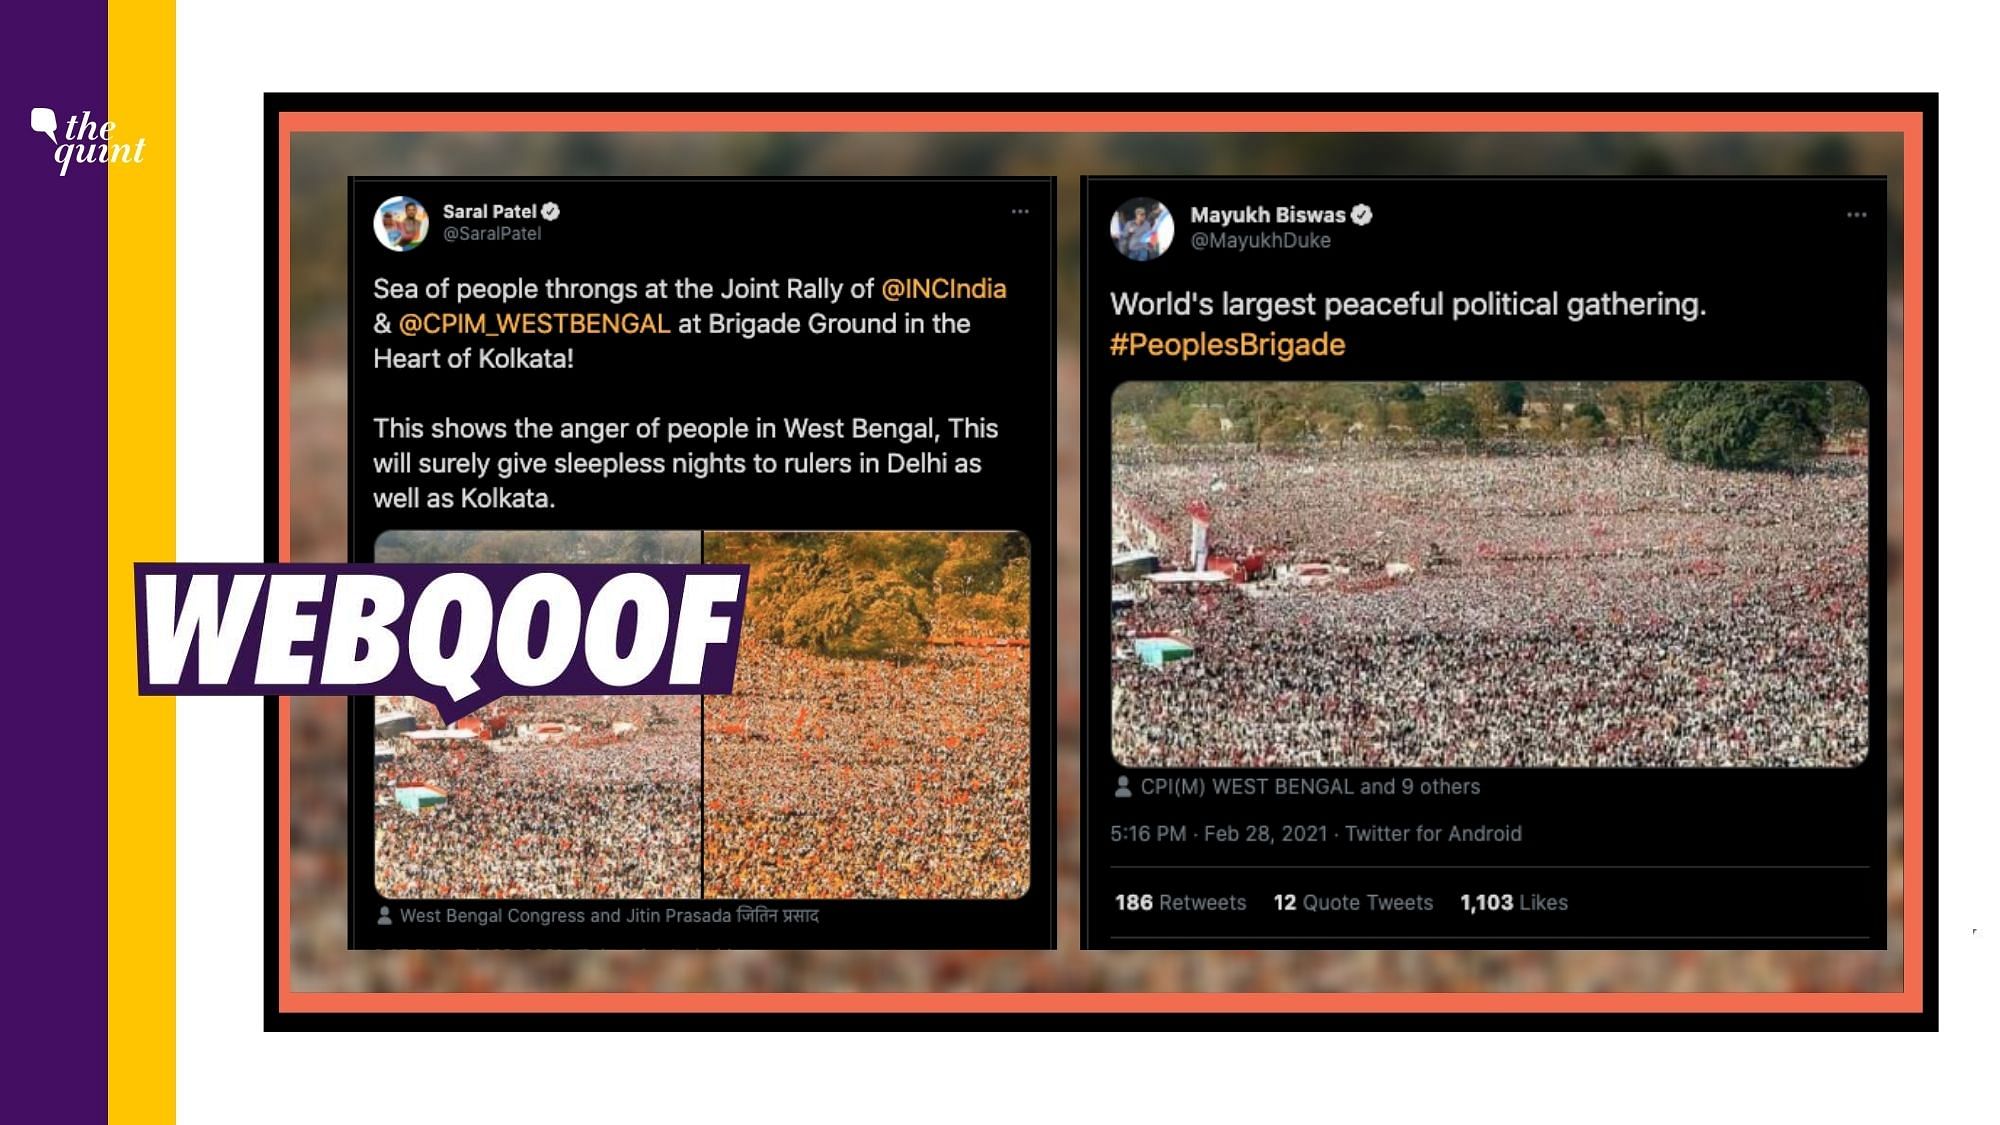 An image showing a massive gathering is doing the rounds on social media with a claim that it is from a recent joint rally organised by Congress and the CPI (M).